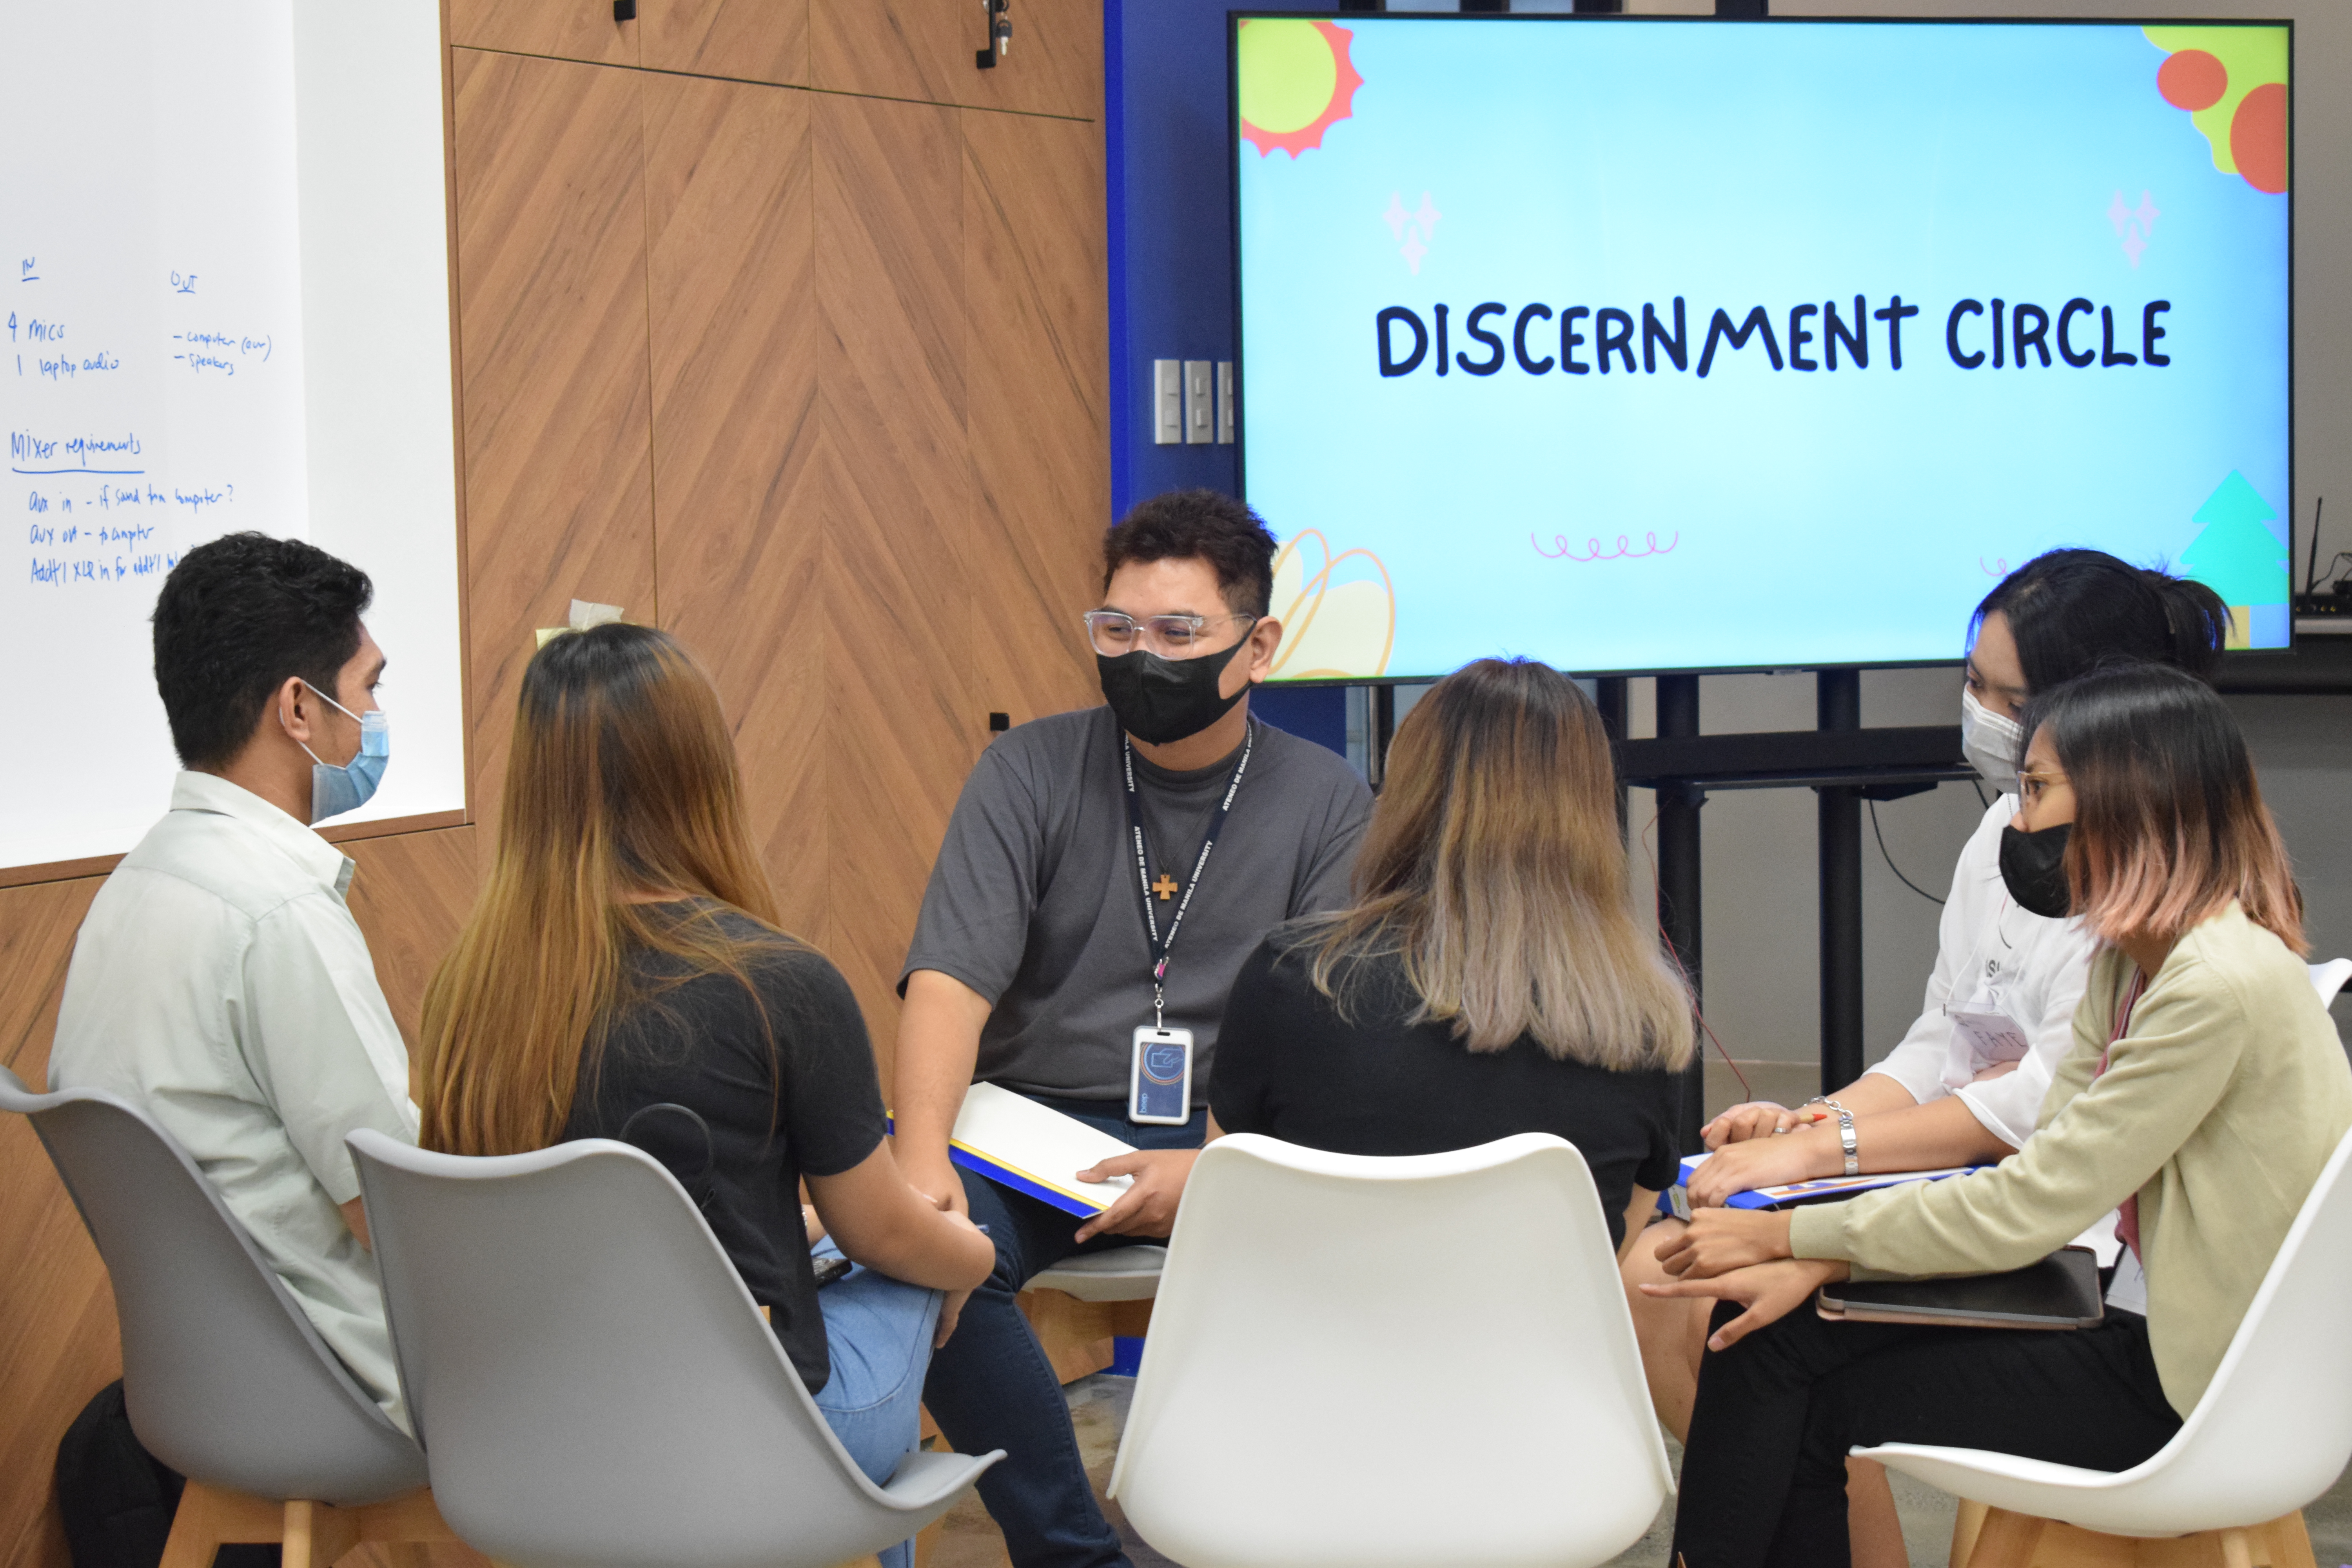 In the foreground, six people sit in a circle listening to the one speaking in the left most. In the background is a TV that says "Discernment Circles".